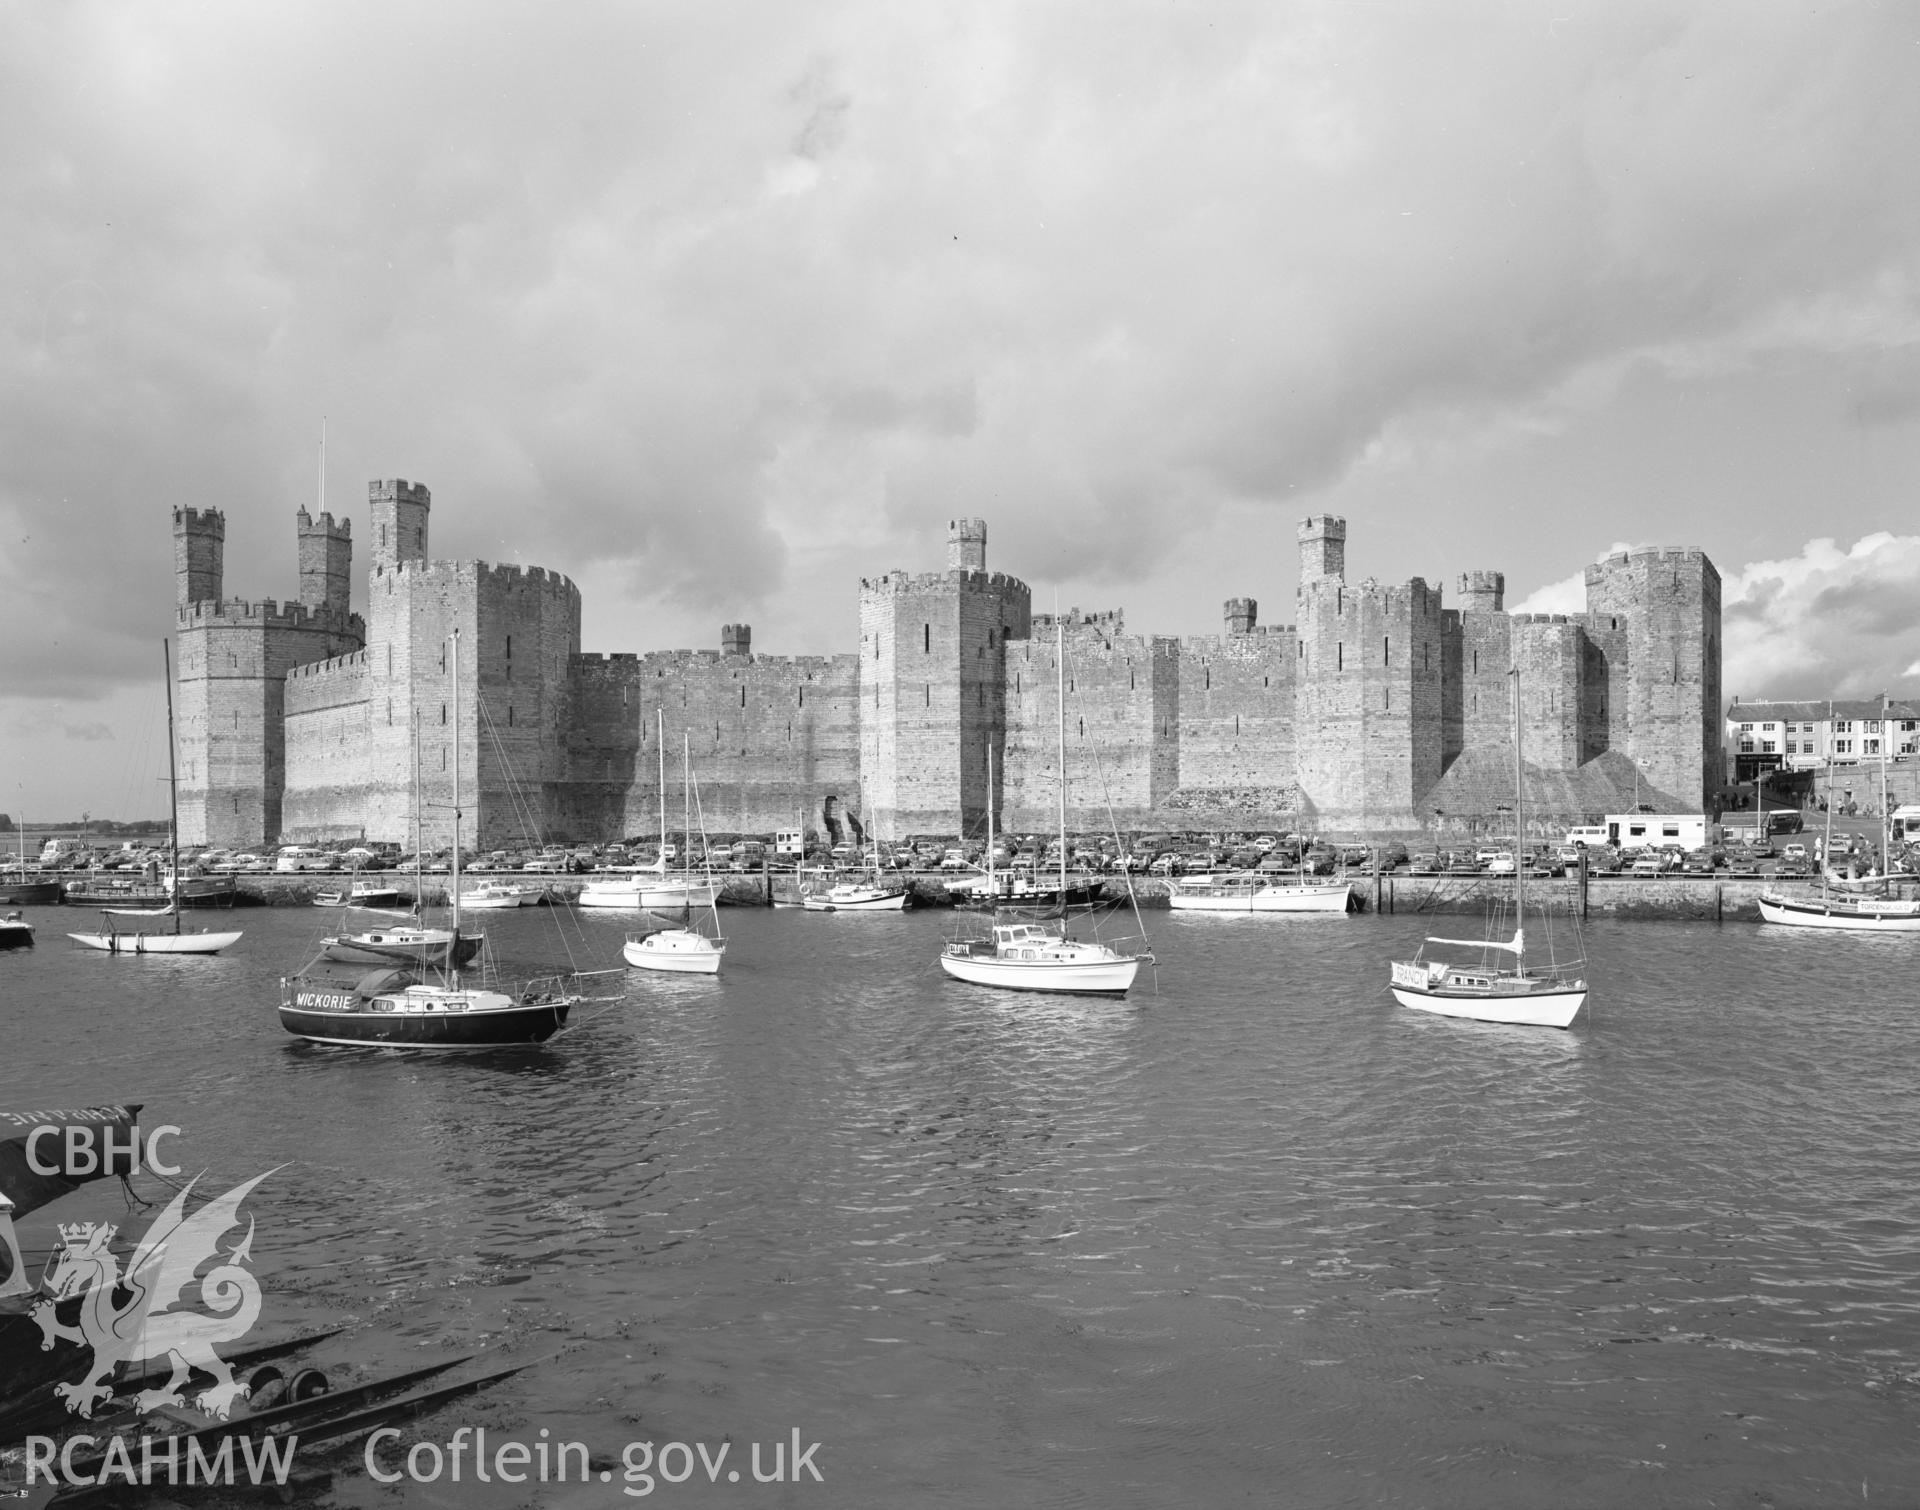 Digital copy of a black and white negative showing Caernarfon Castle, collated by the former Central Office of Information.